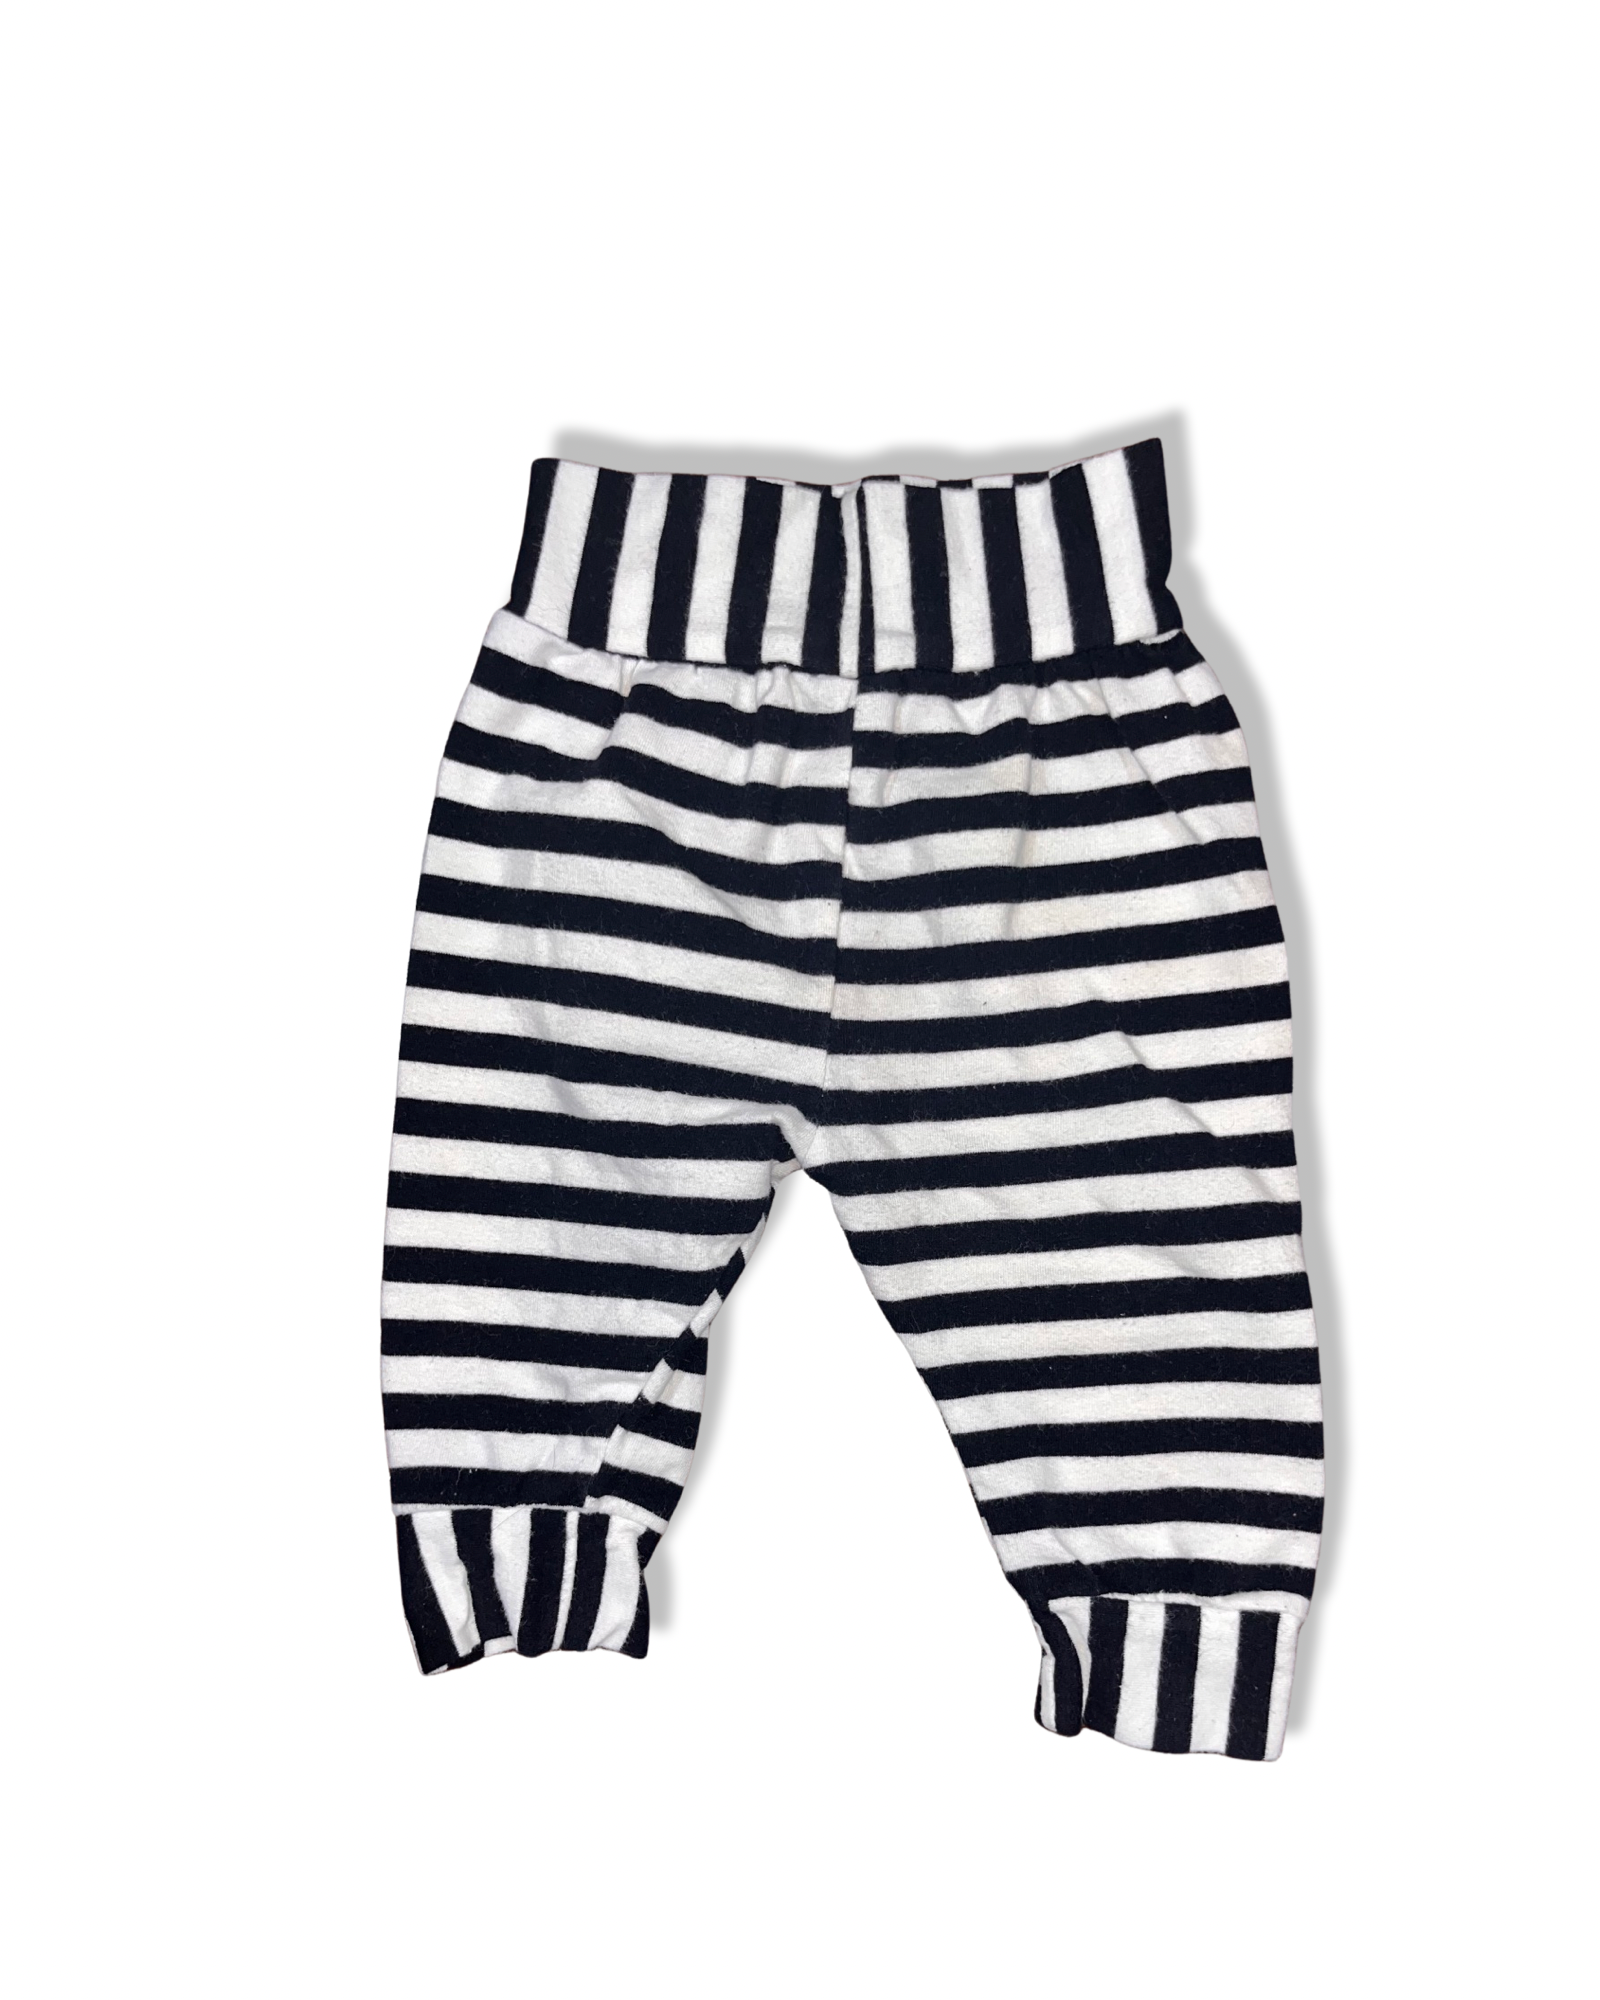 Black and White Sripped Pants (3-6M)